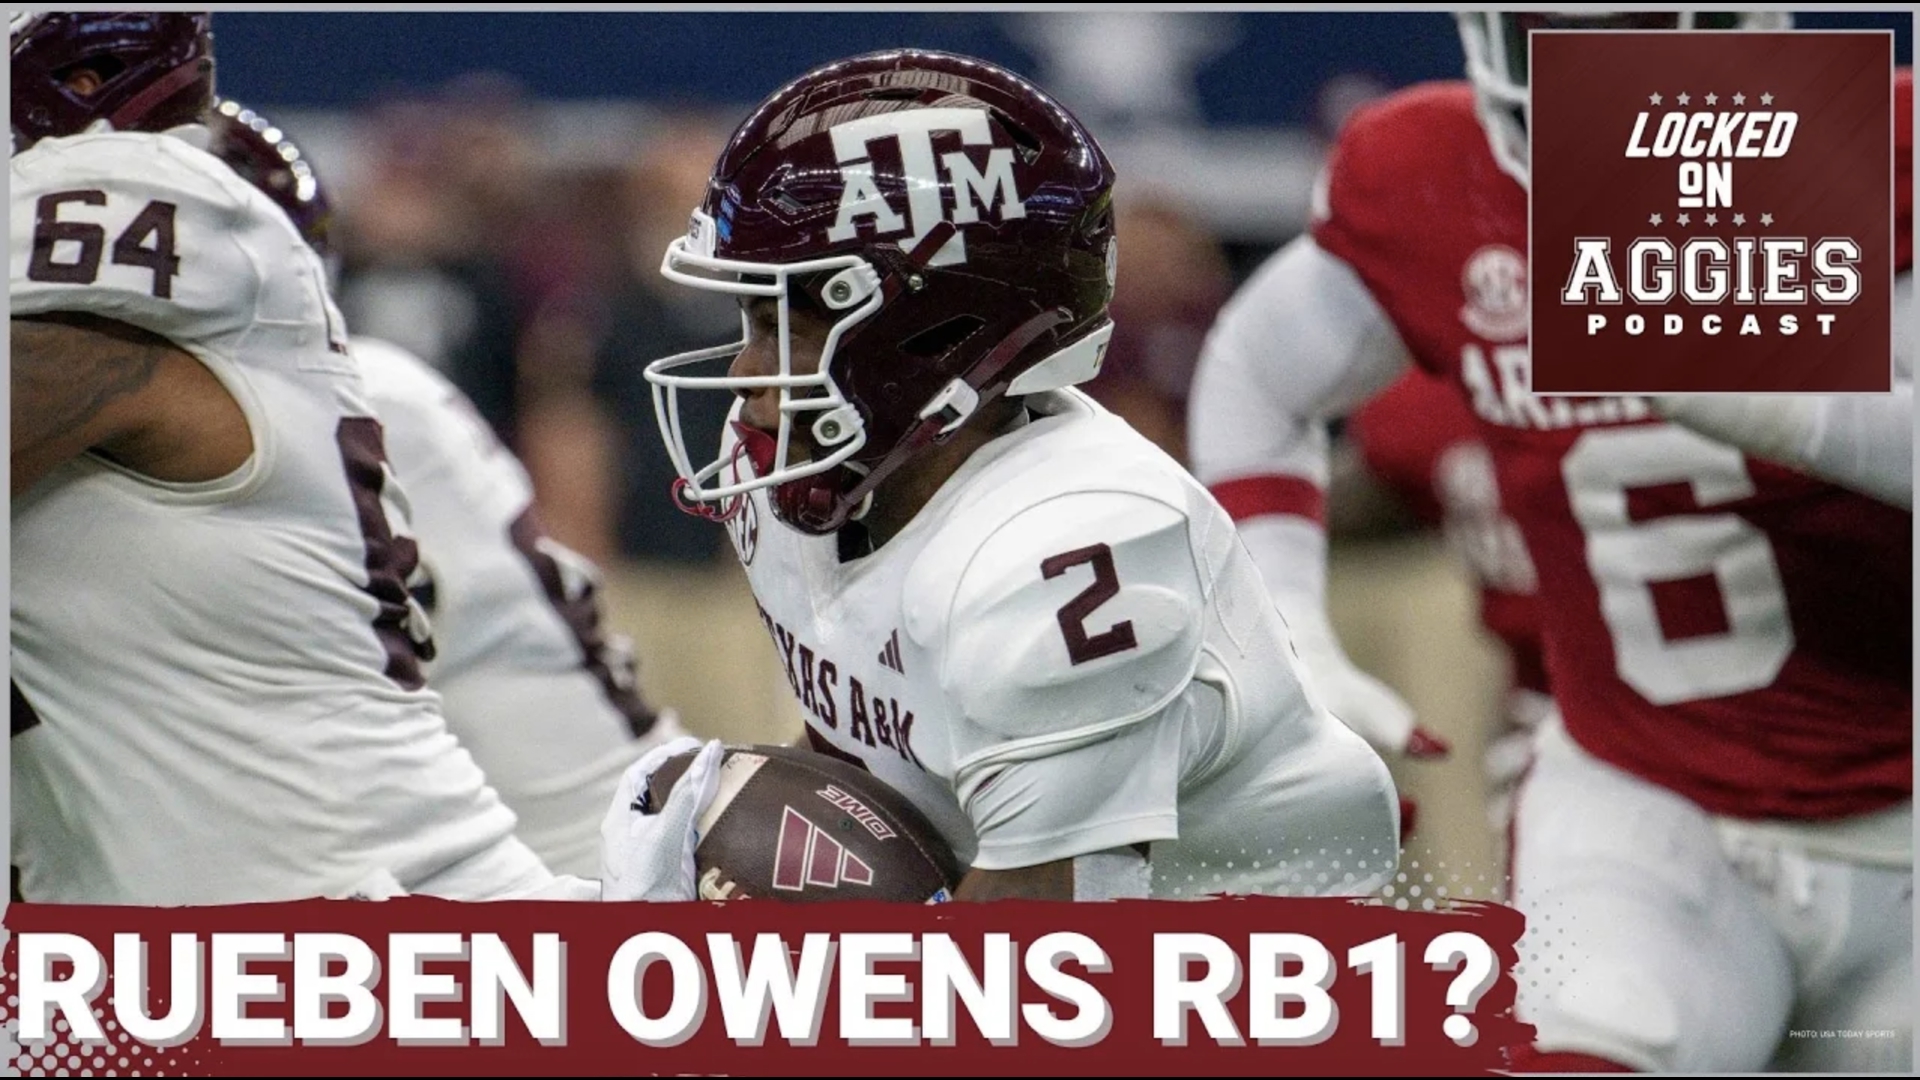 On today's episode of Locked On Aggies, host Andrew Stefaniak talks about who will be running back for the Texas A&M Aggies.